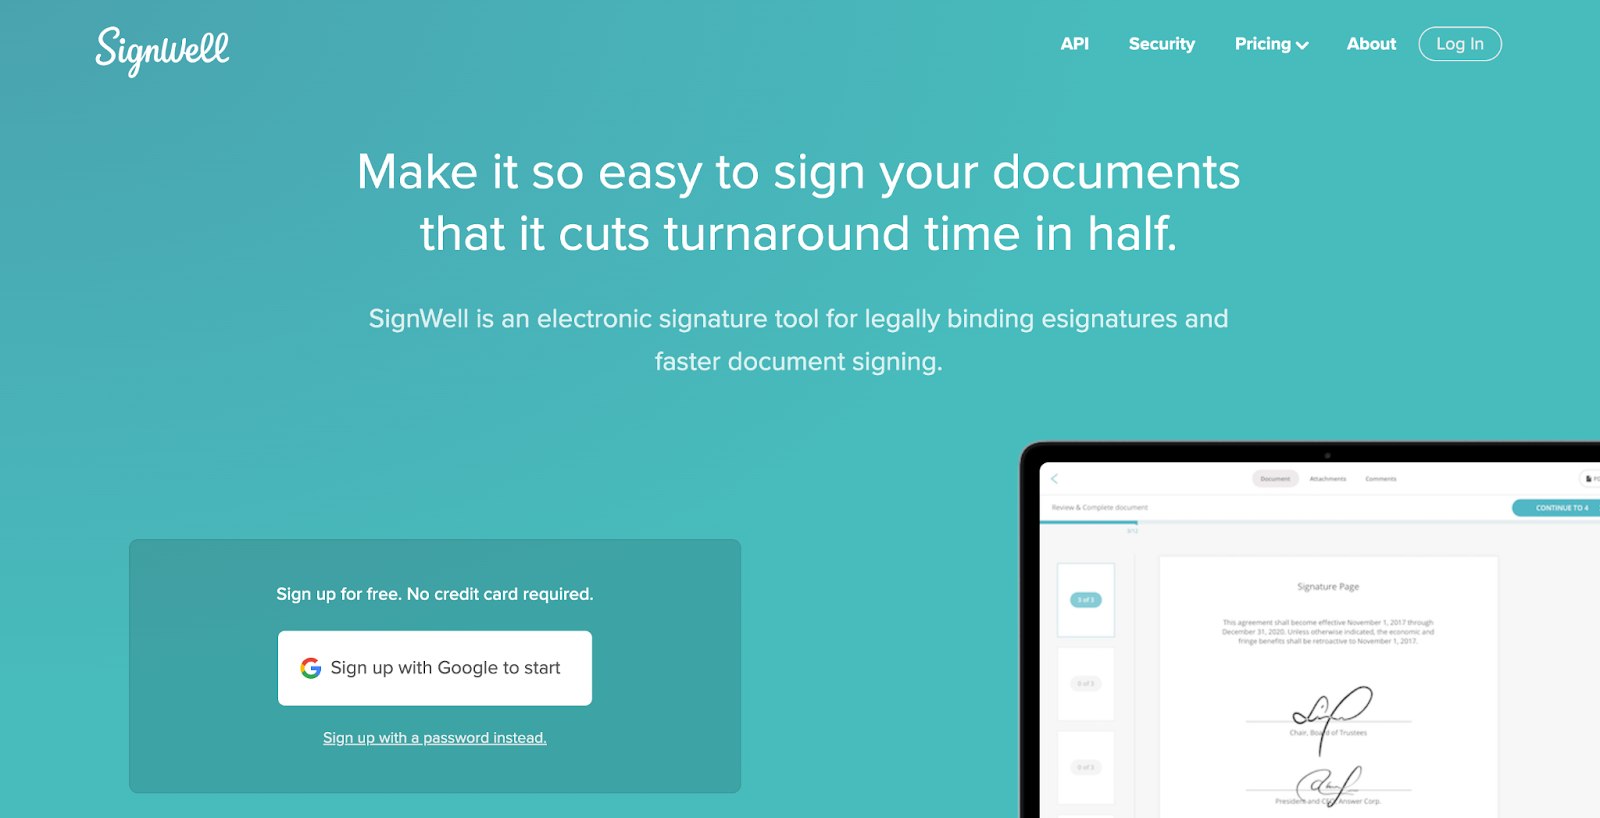 SignWell - Make it so easy to sign your documents that it cuts turnaround time in half 